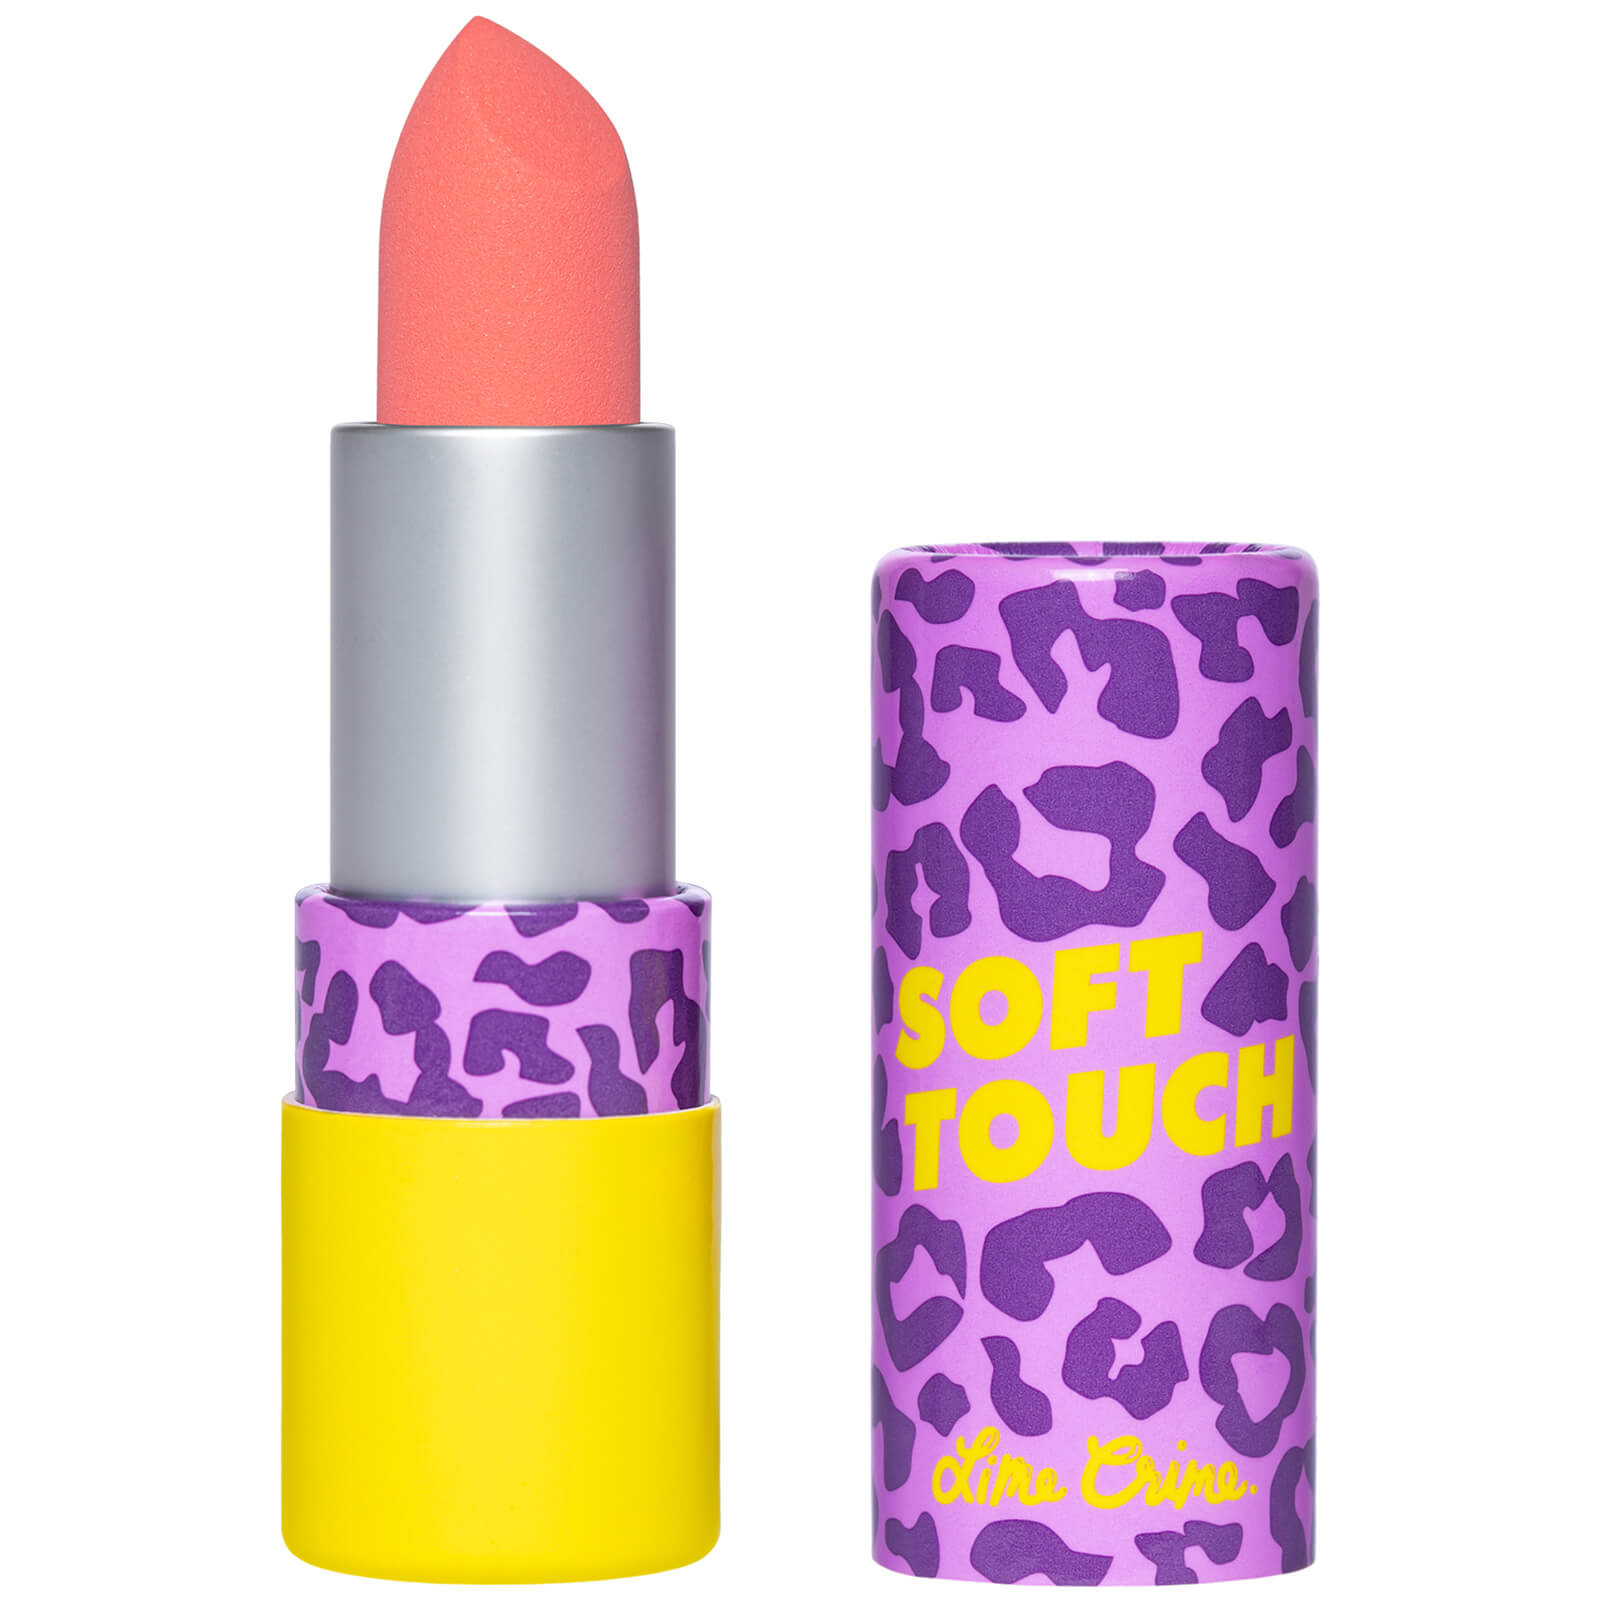 Image of Lime Crime Soft Touch Lipstick 4.4g (Various Shades) - Punked Up Peach